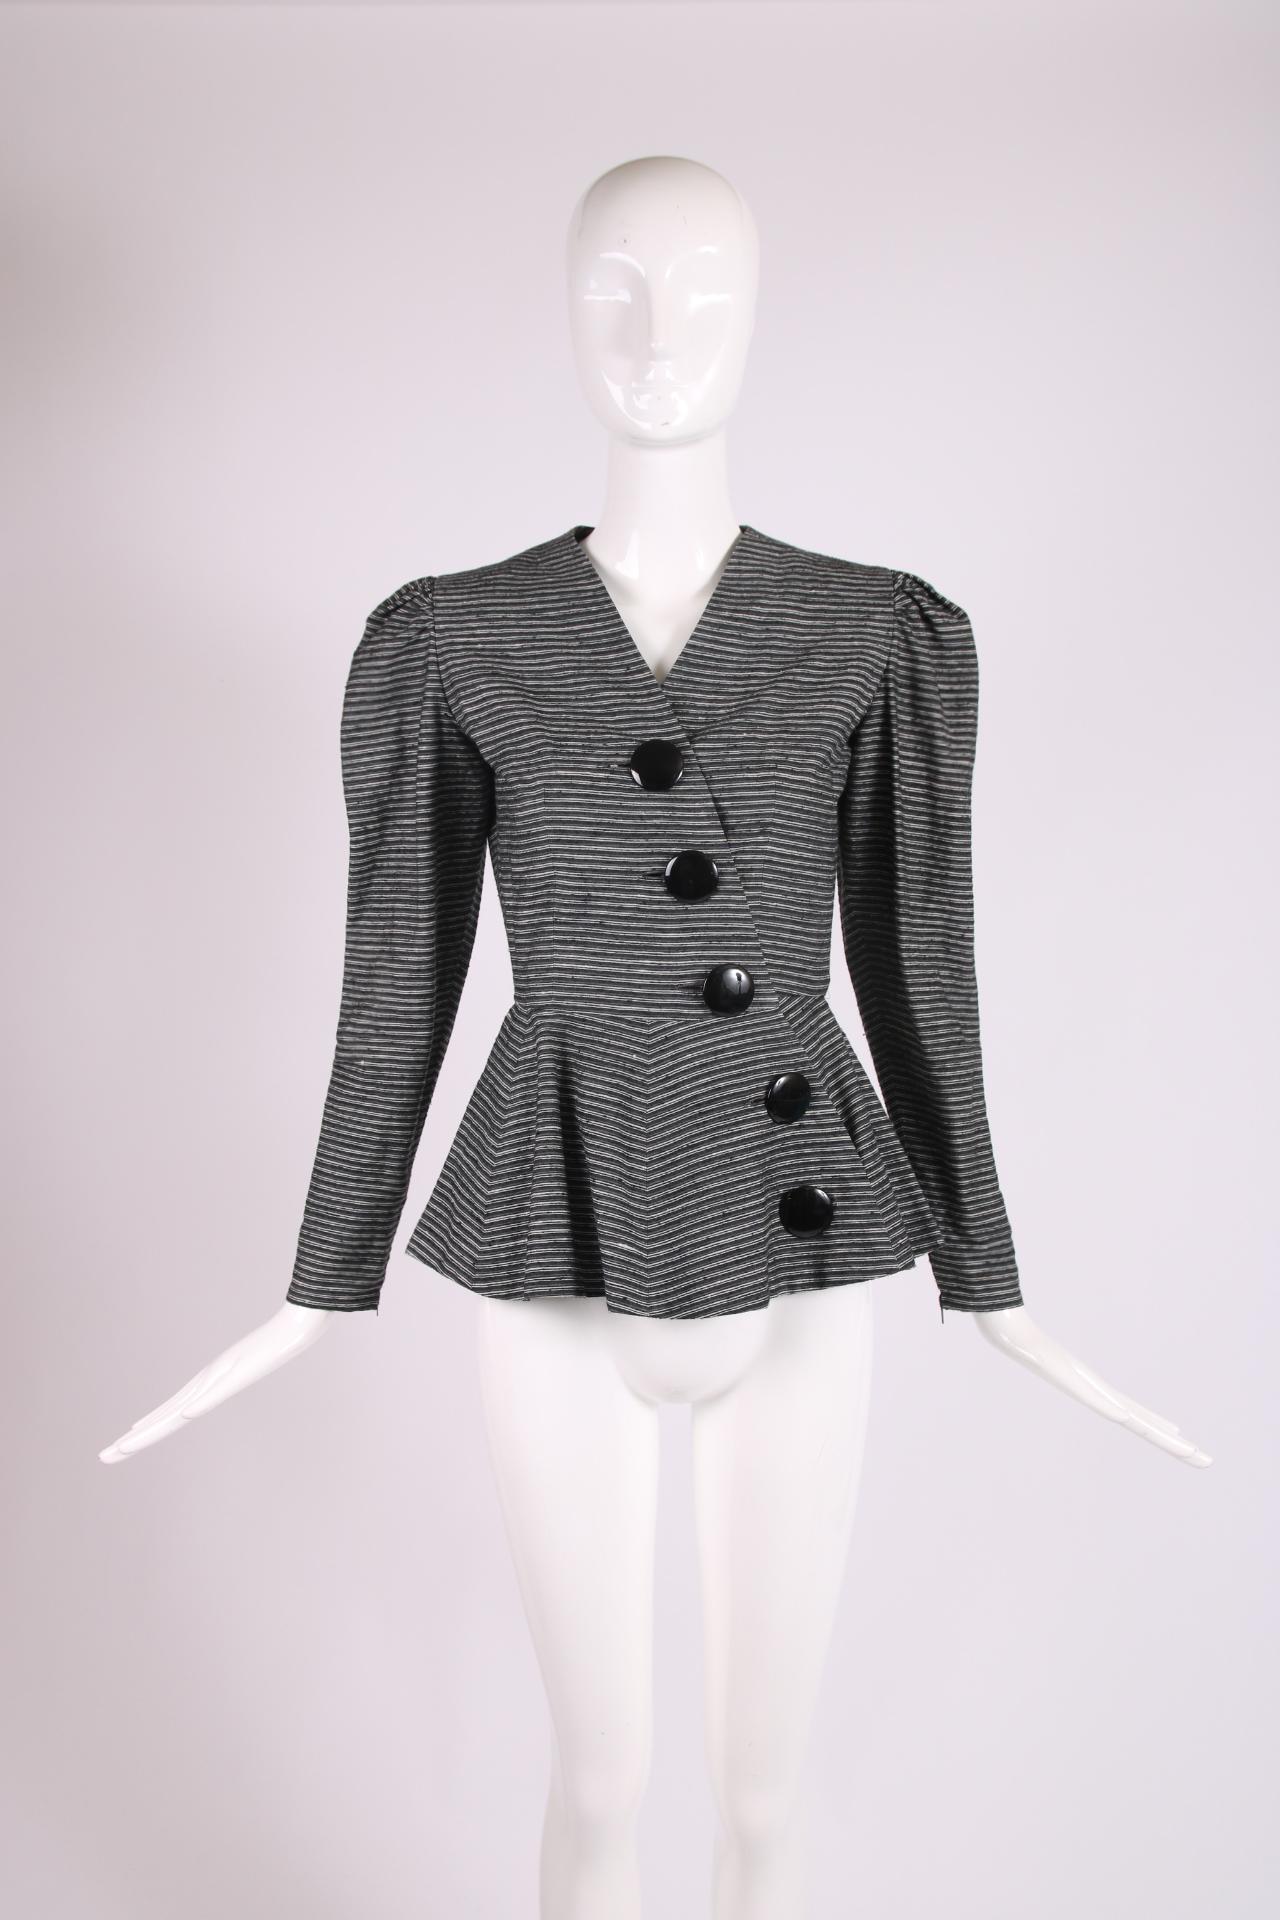 Vintage Lanvin black and white striped silk and cotton blend jacket with peplum waist and diagonal oversized black button closures. In excellent condition - size tag 38. See measurements.

Shoulders - 14